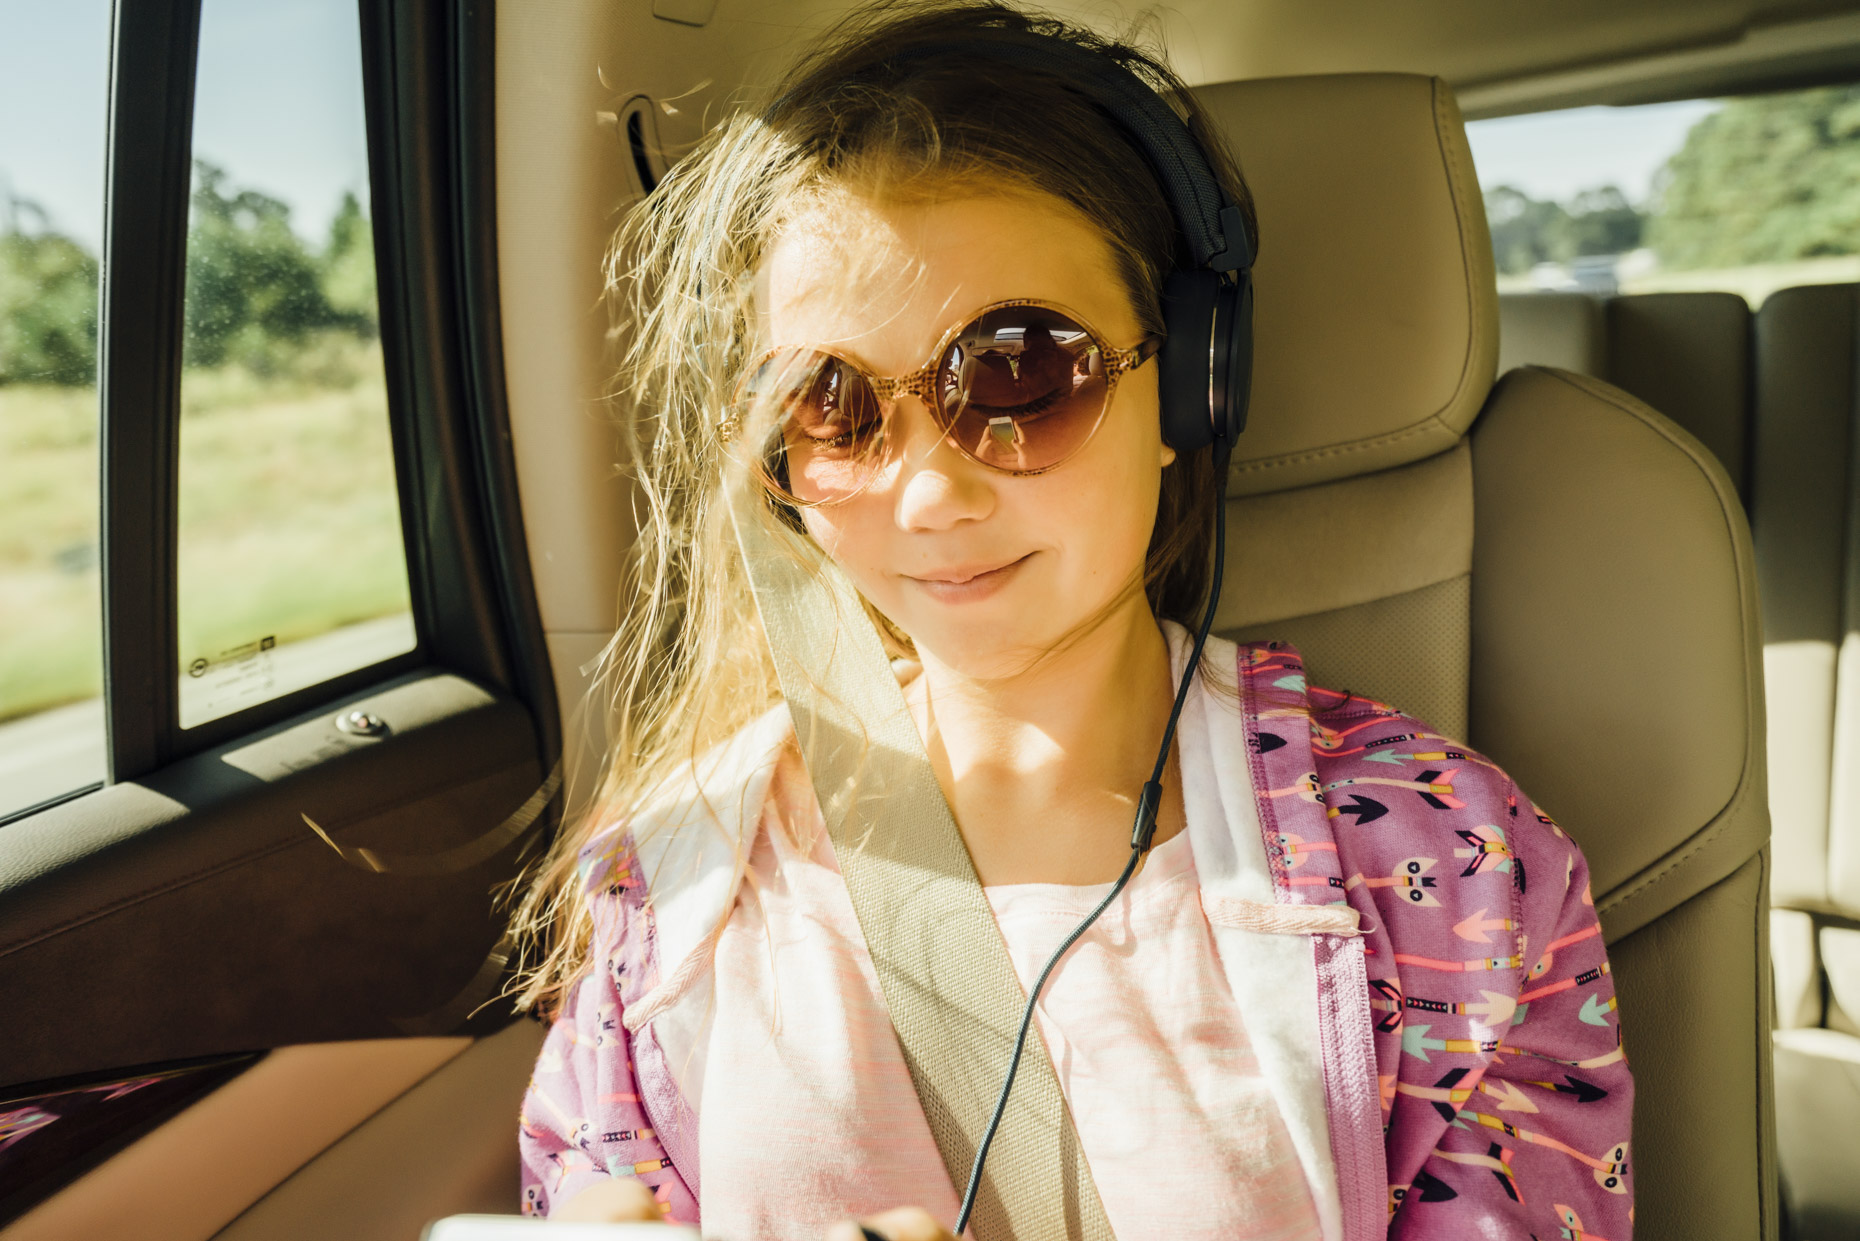 Teen girl in round glasses and headphones riding in car with hair blowing in the wind